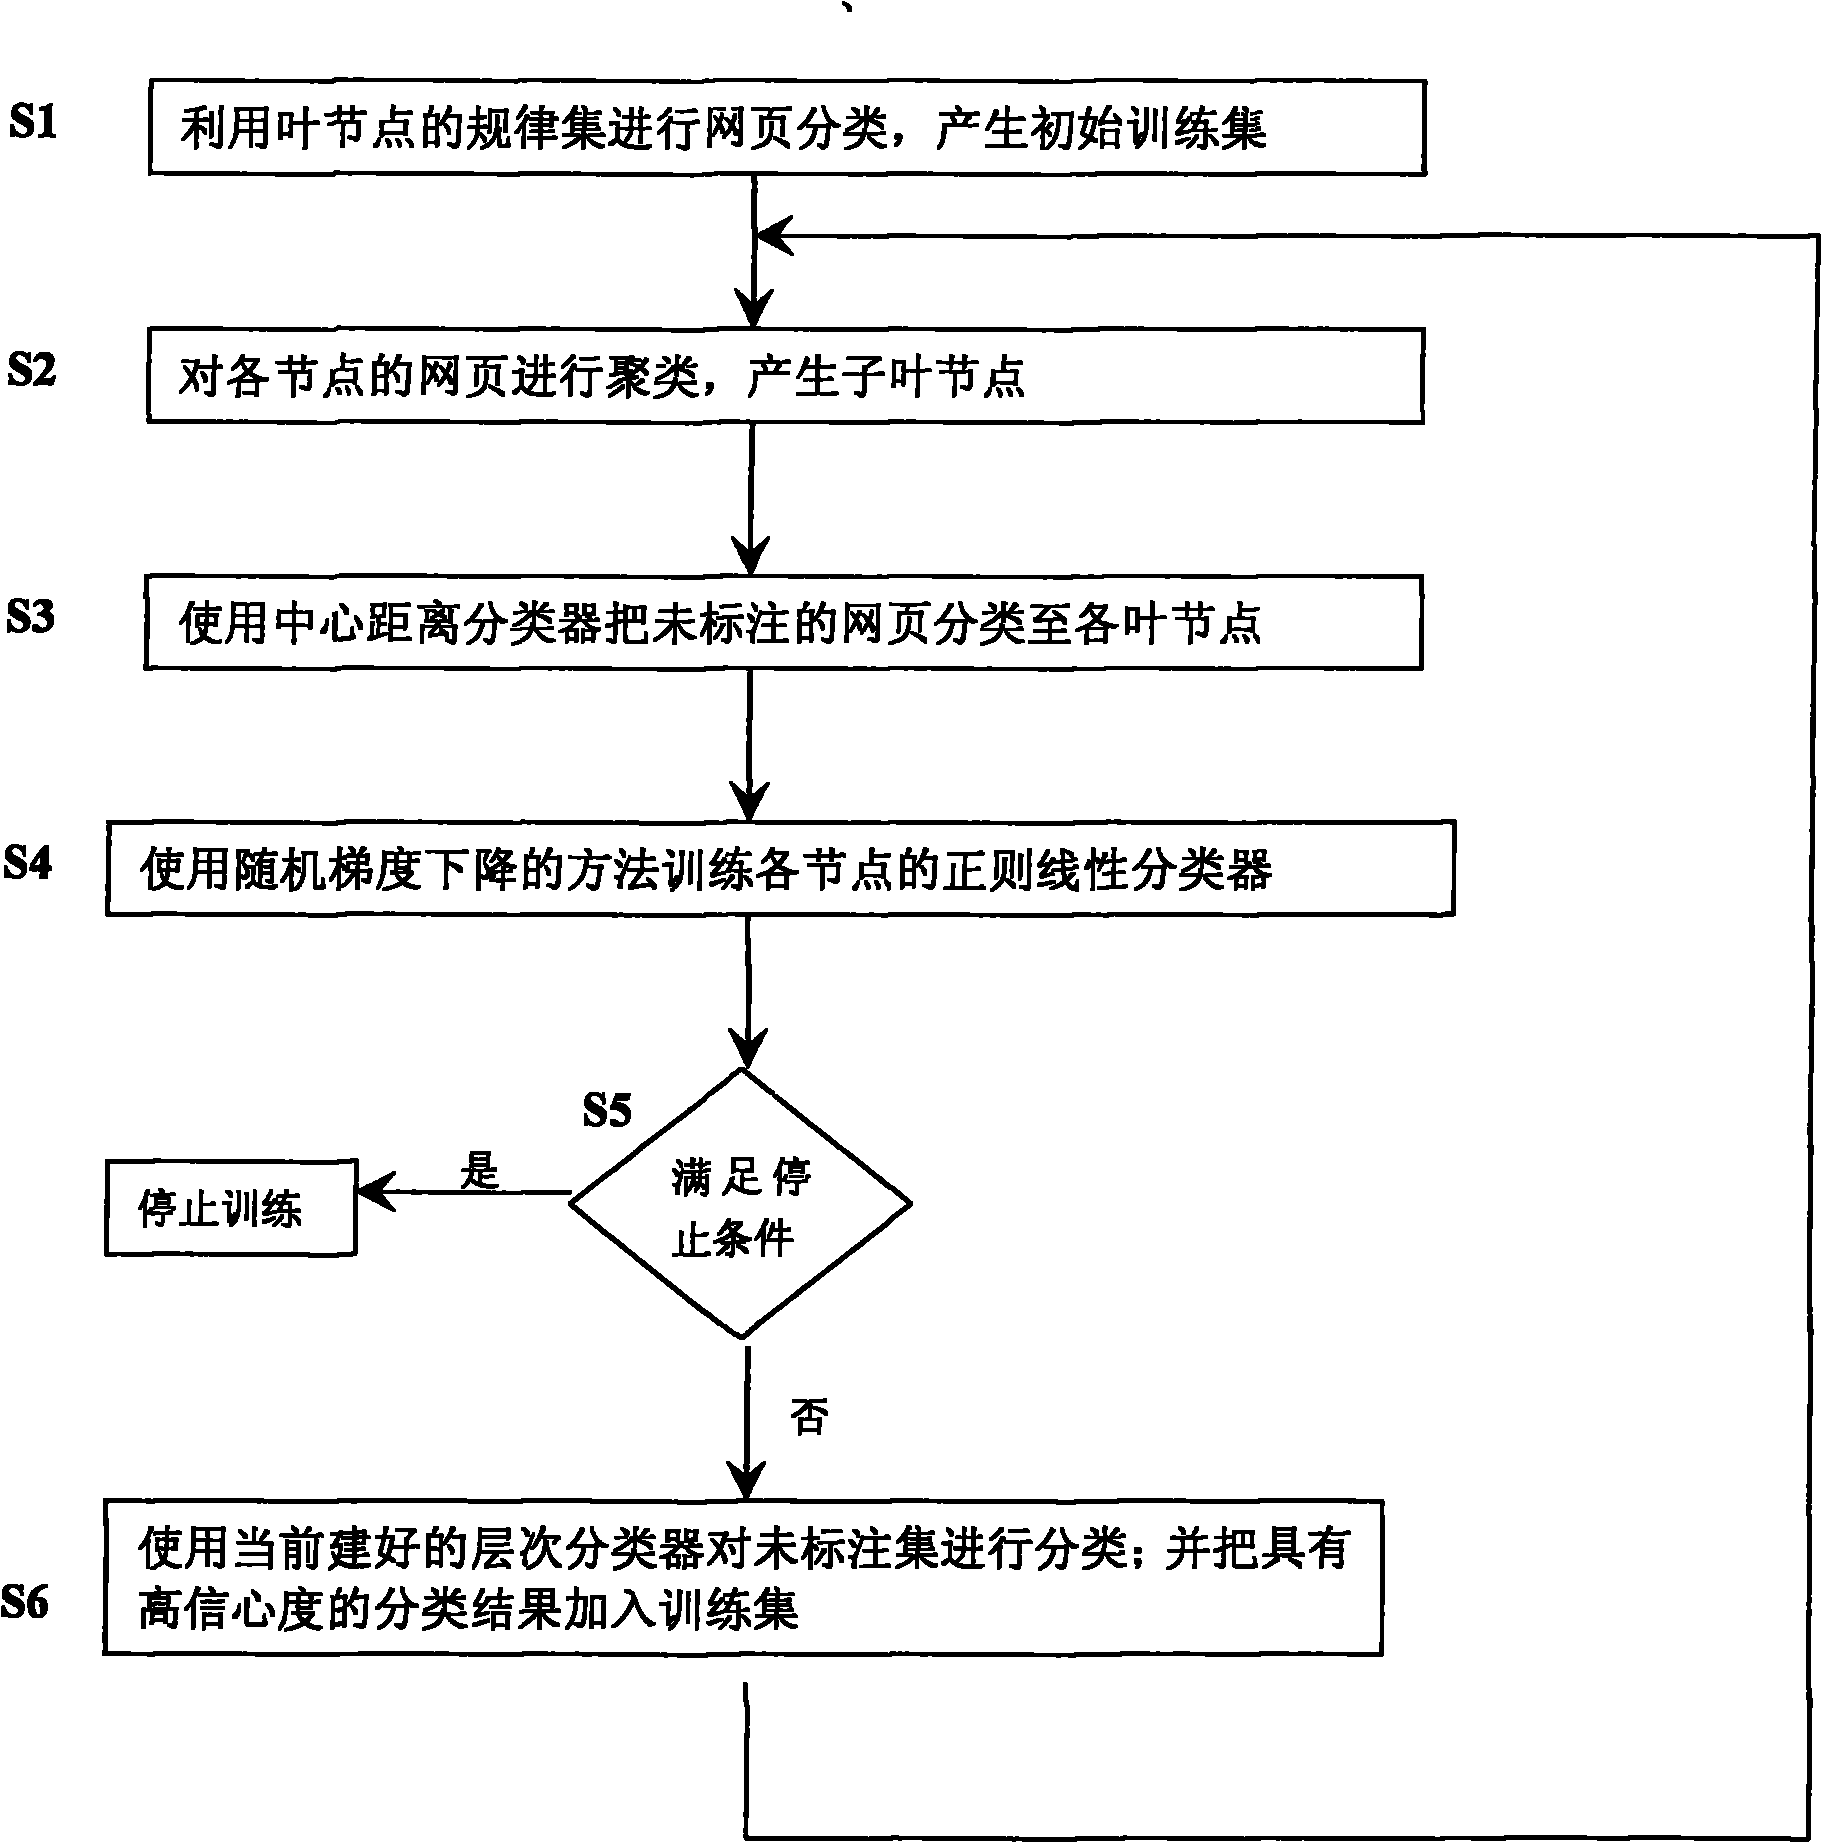 Semi-supervised mass data hierarchy classification method